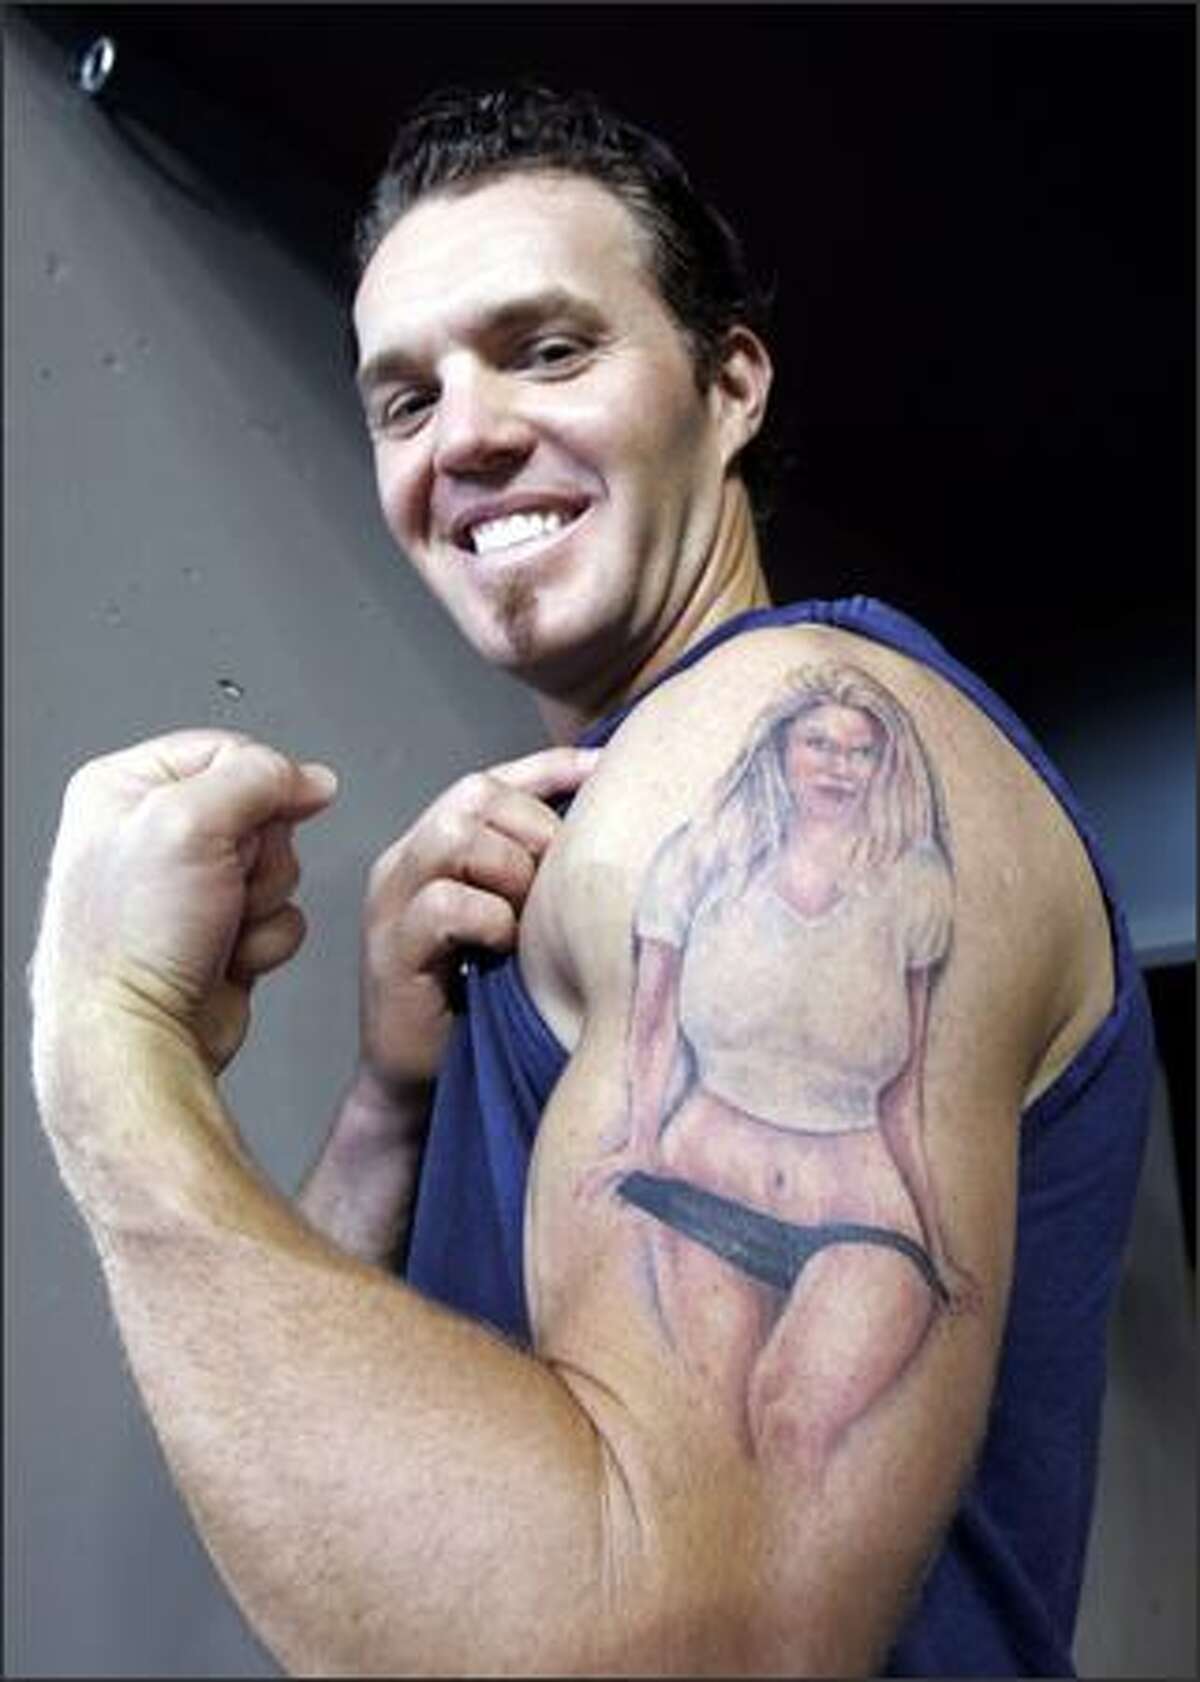 Scott Spiezio shows off his tattoo depicting girlfriend Jenn, 27, a model who lives in Anaheim. The tattoo cost $500 and took about seven hours. (Elaine Thompson/AP/Special to the P-I)